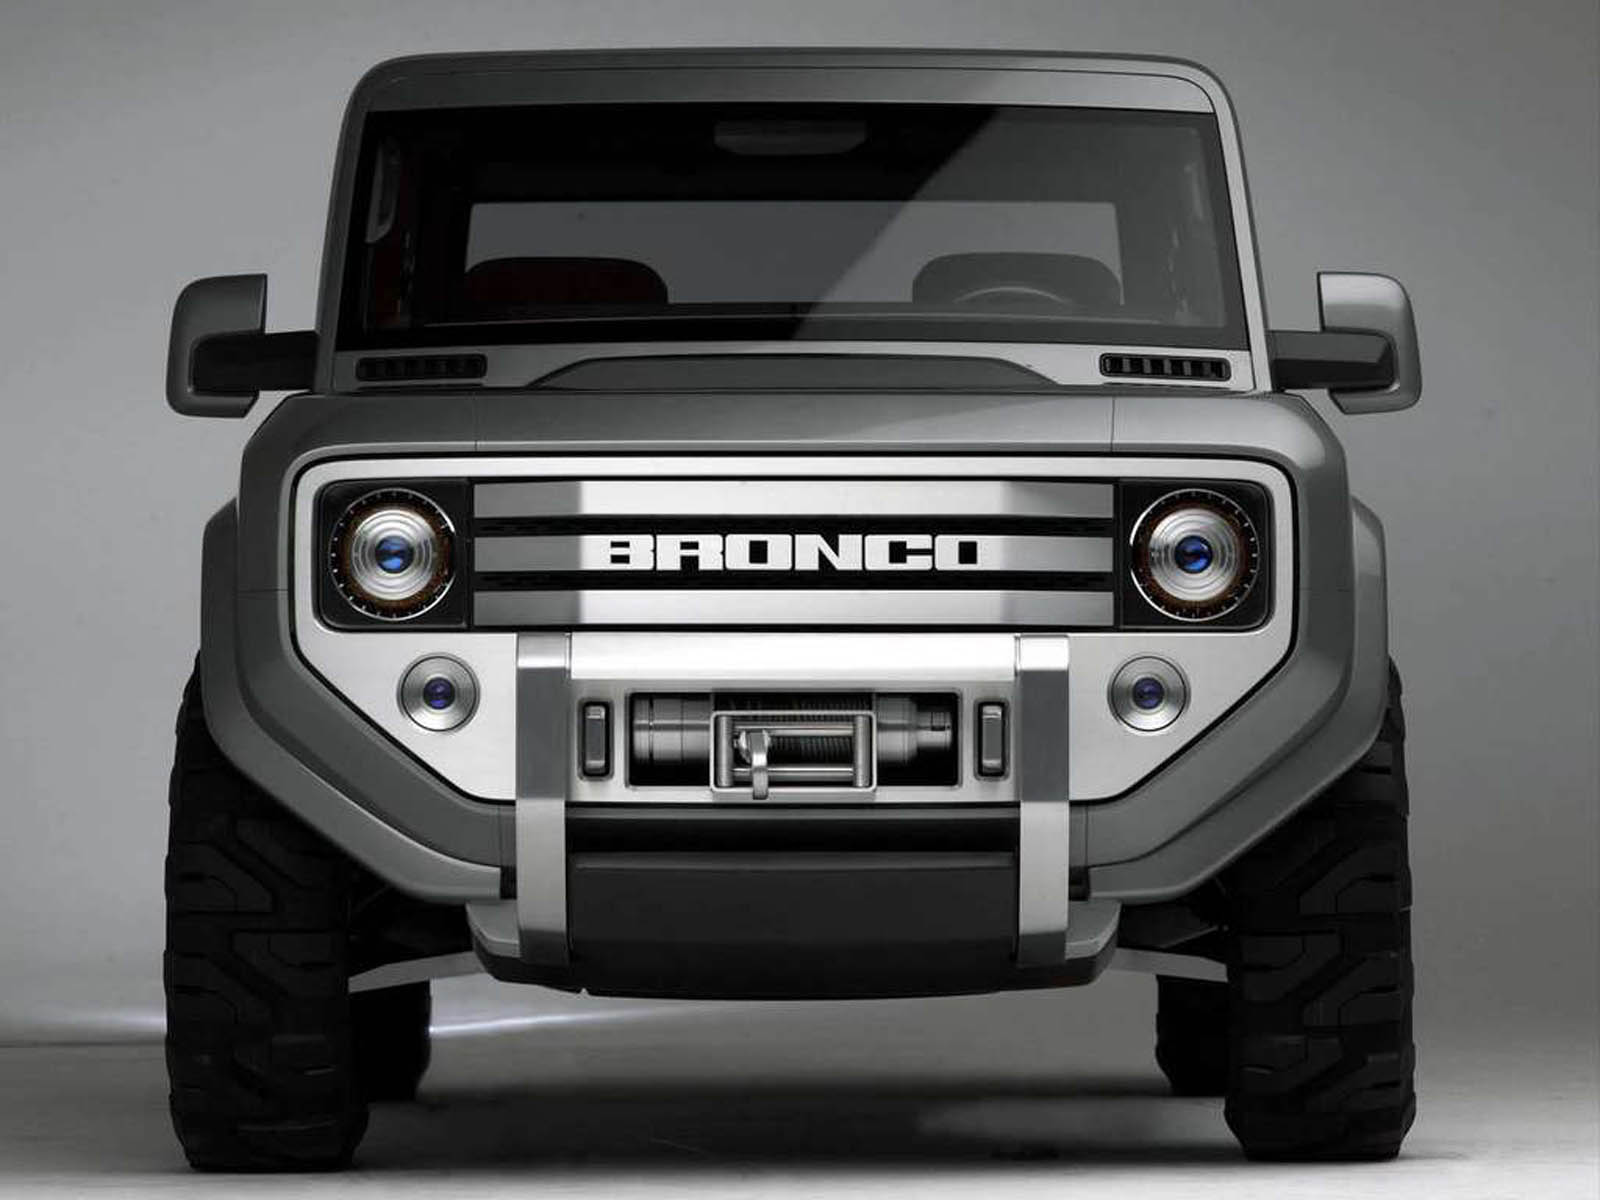 Tag: Ford Bronco Concept Car Wallpapers,Backgrounds, Photos, Images ...